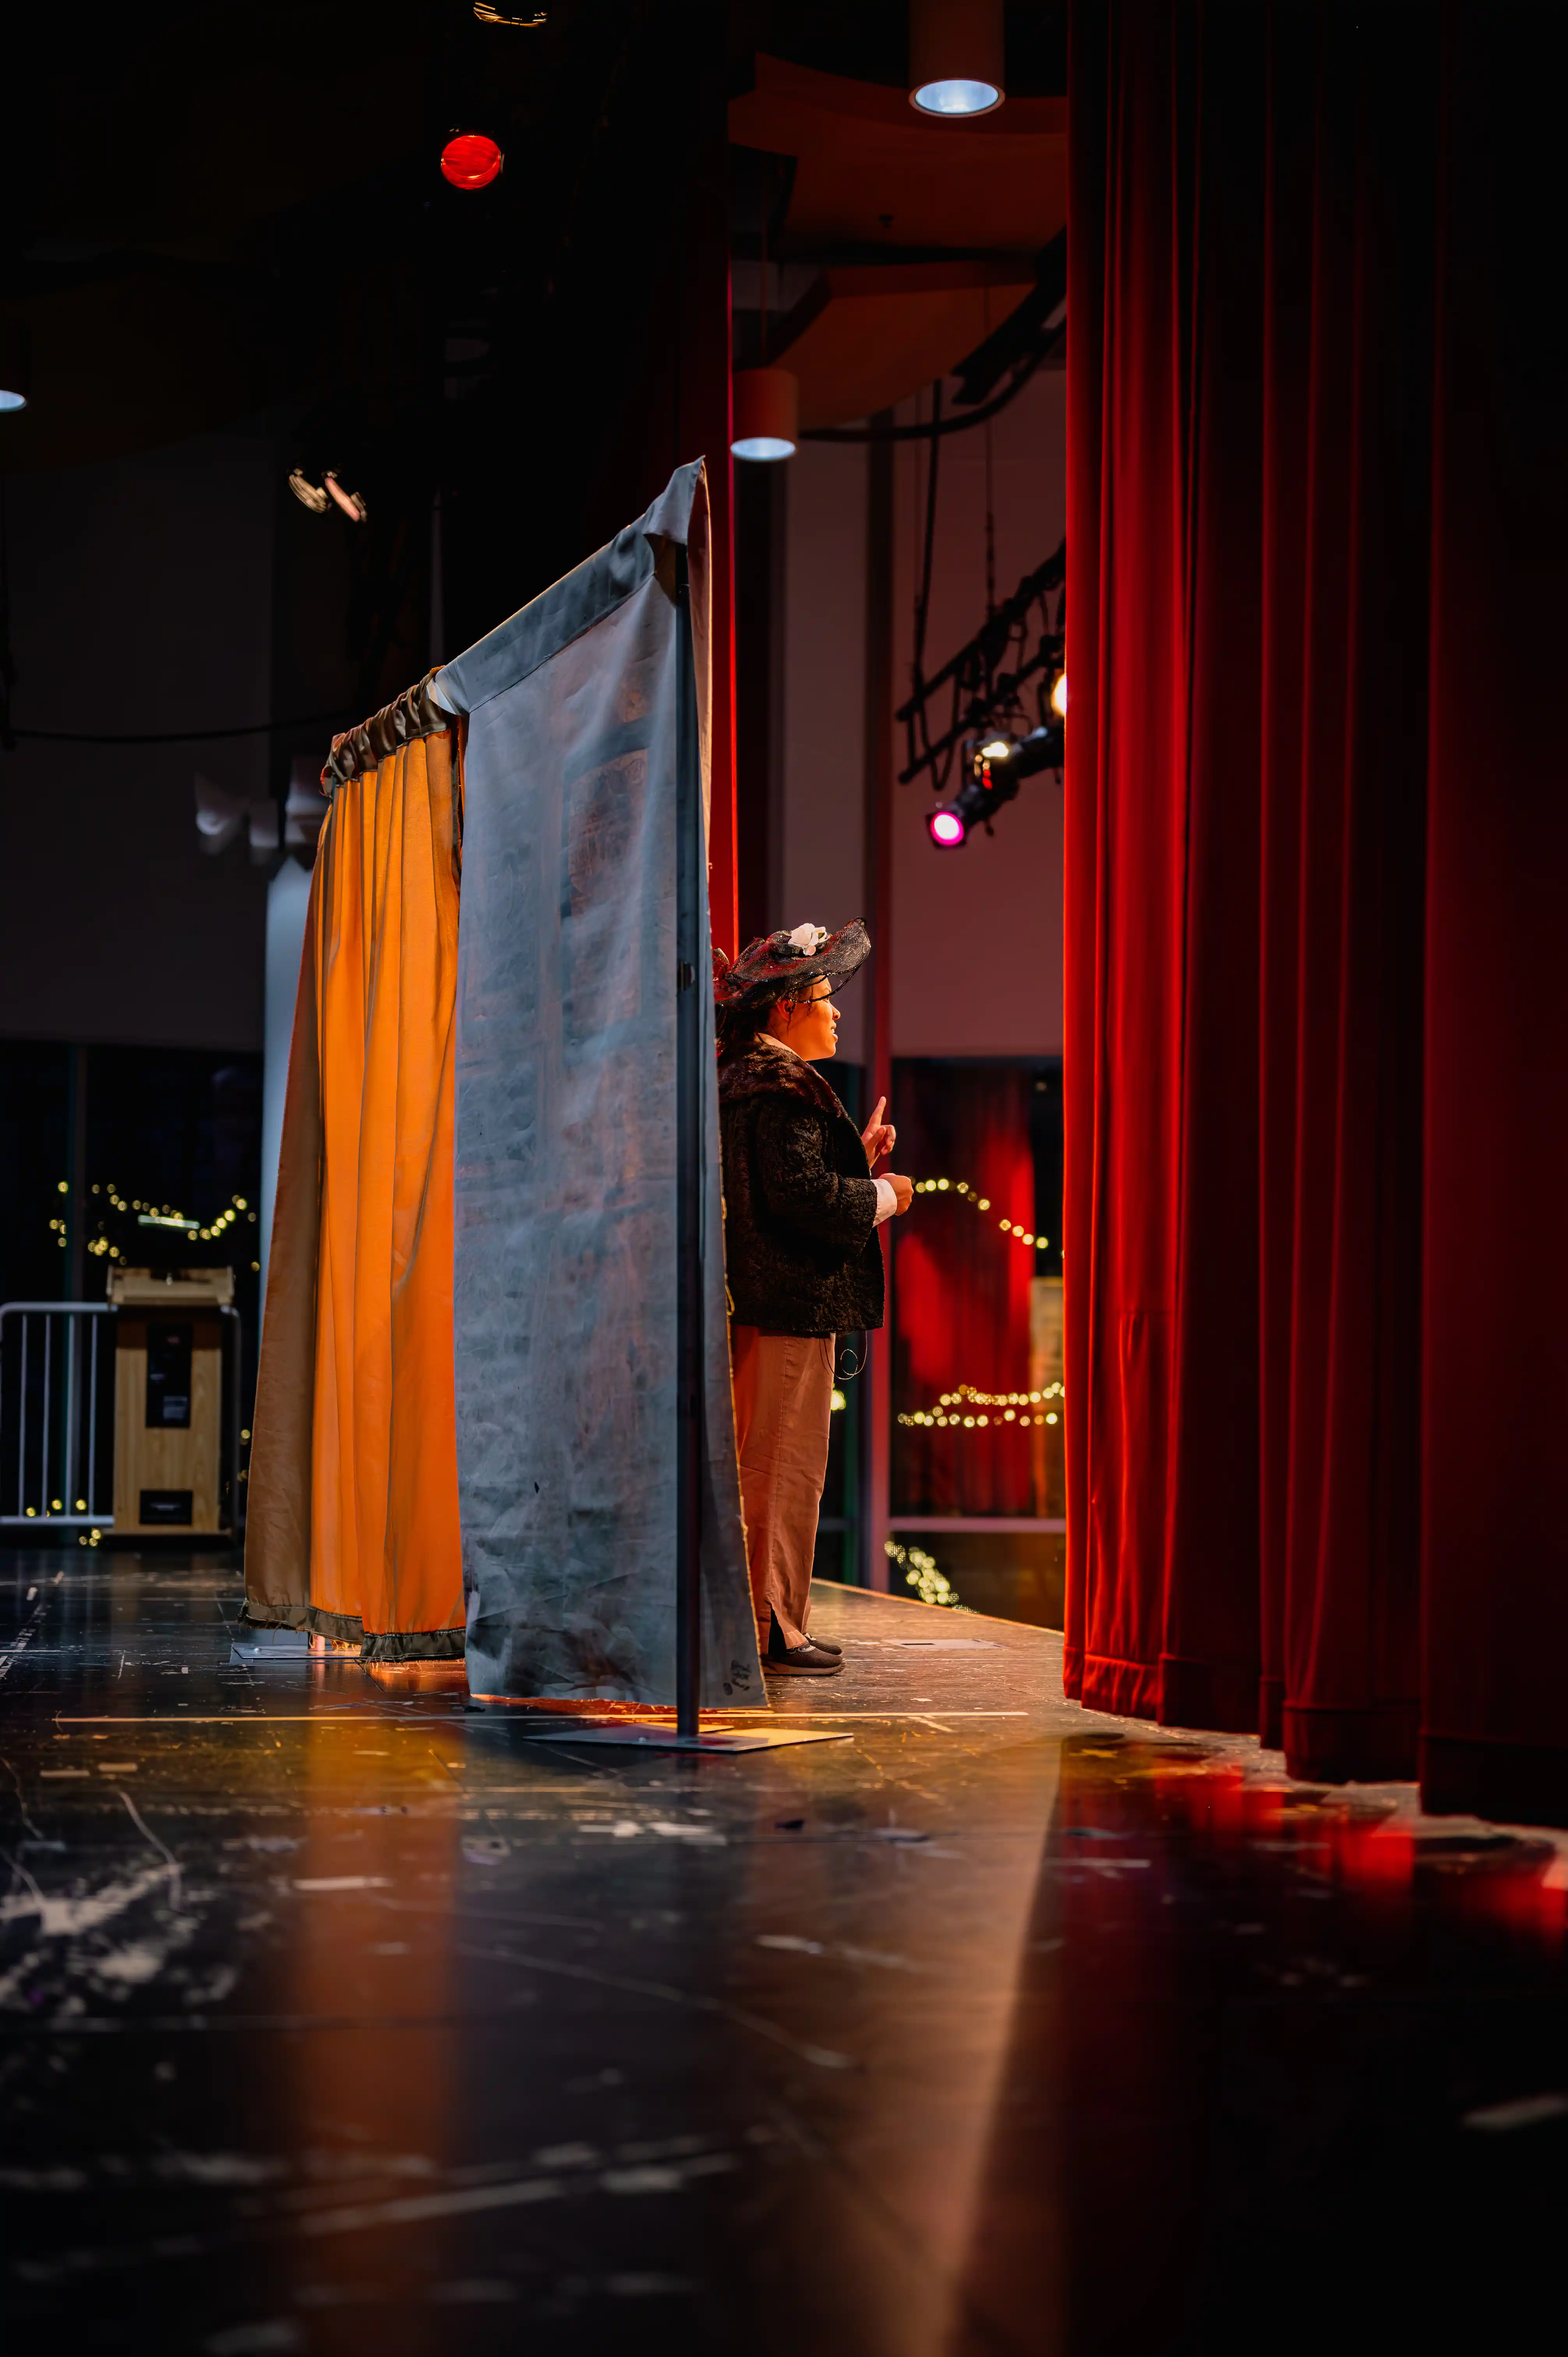 Person peeking from behind stage curtains, with stage lighting visible.